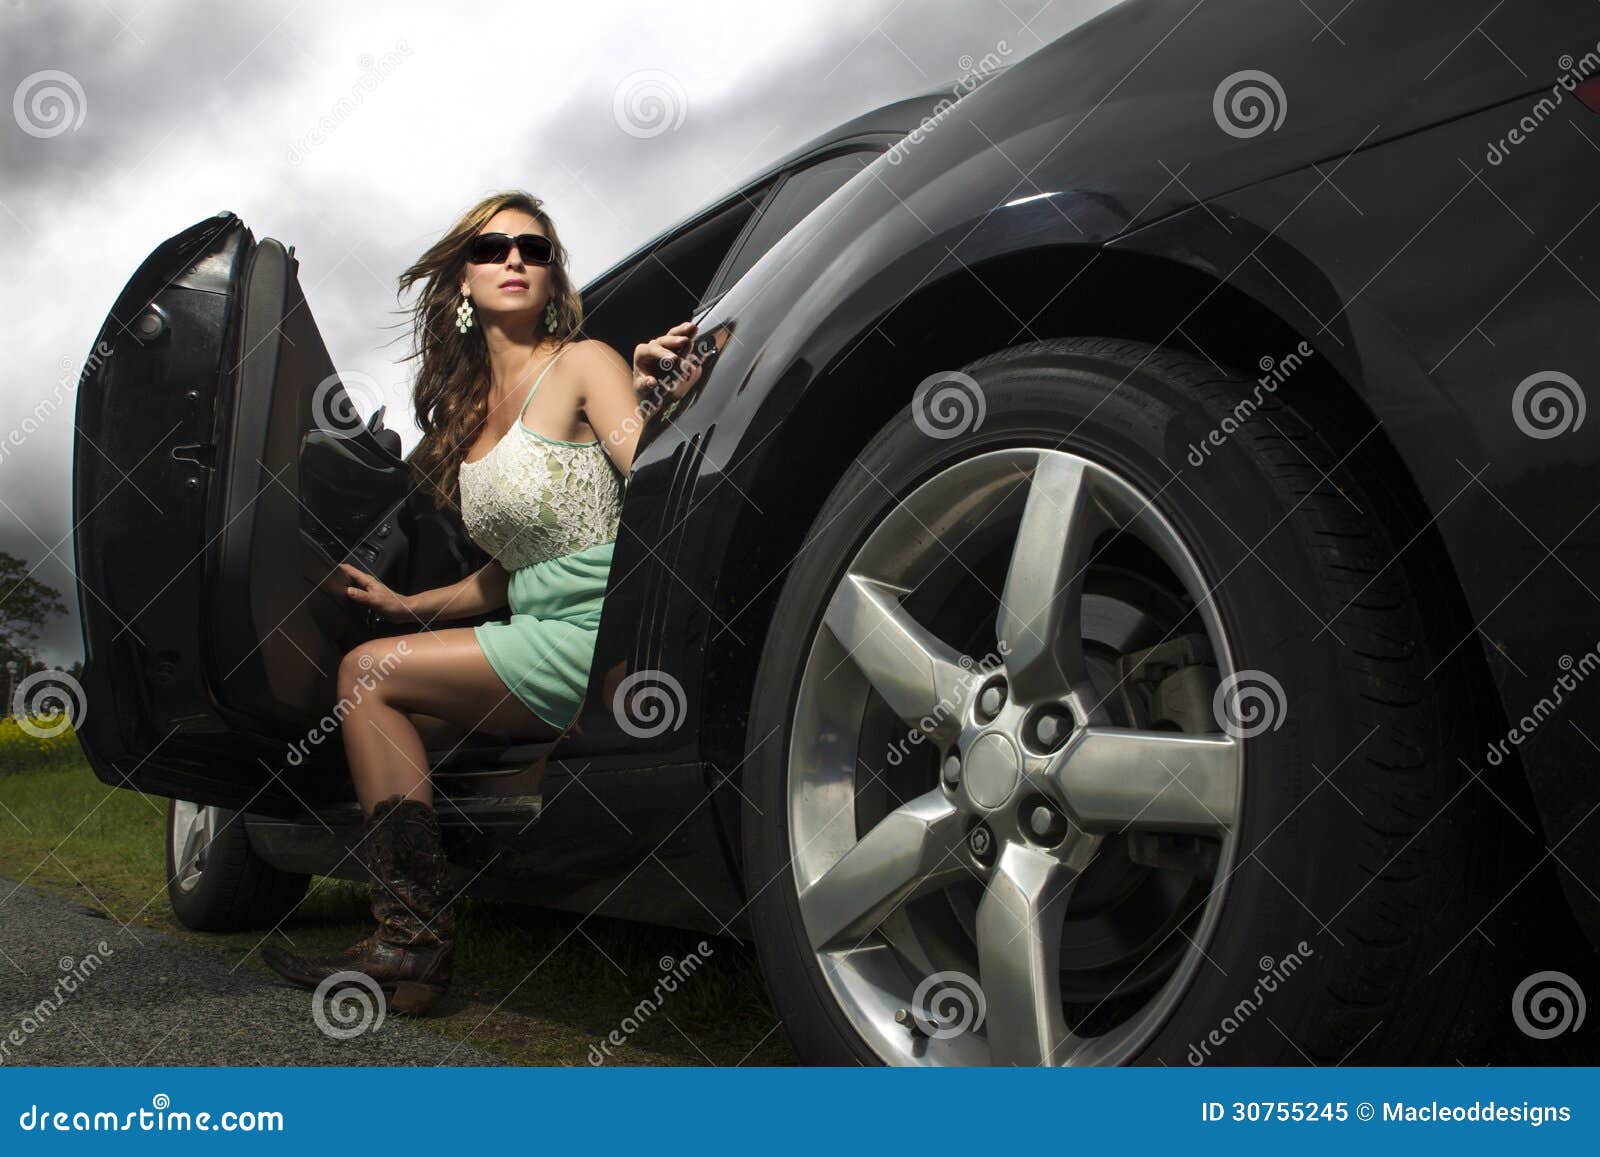 Woman In Boots Getting Out Of Car Stock Image Image Of